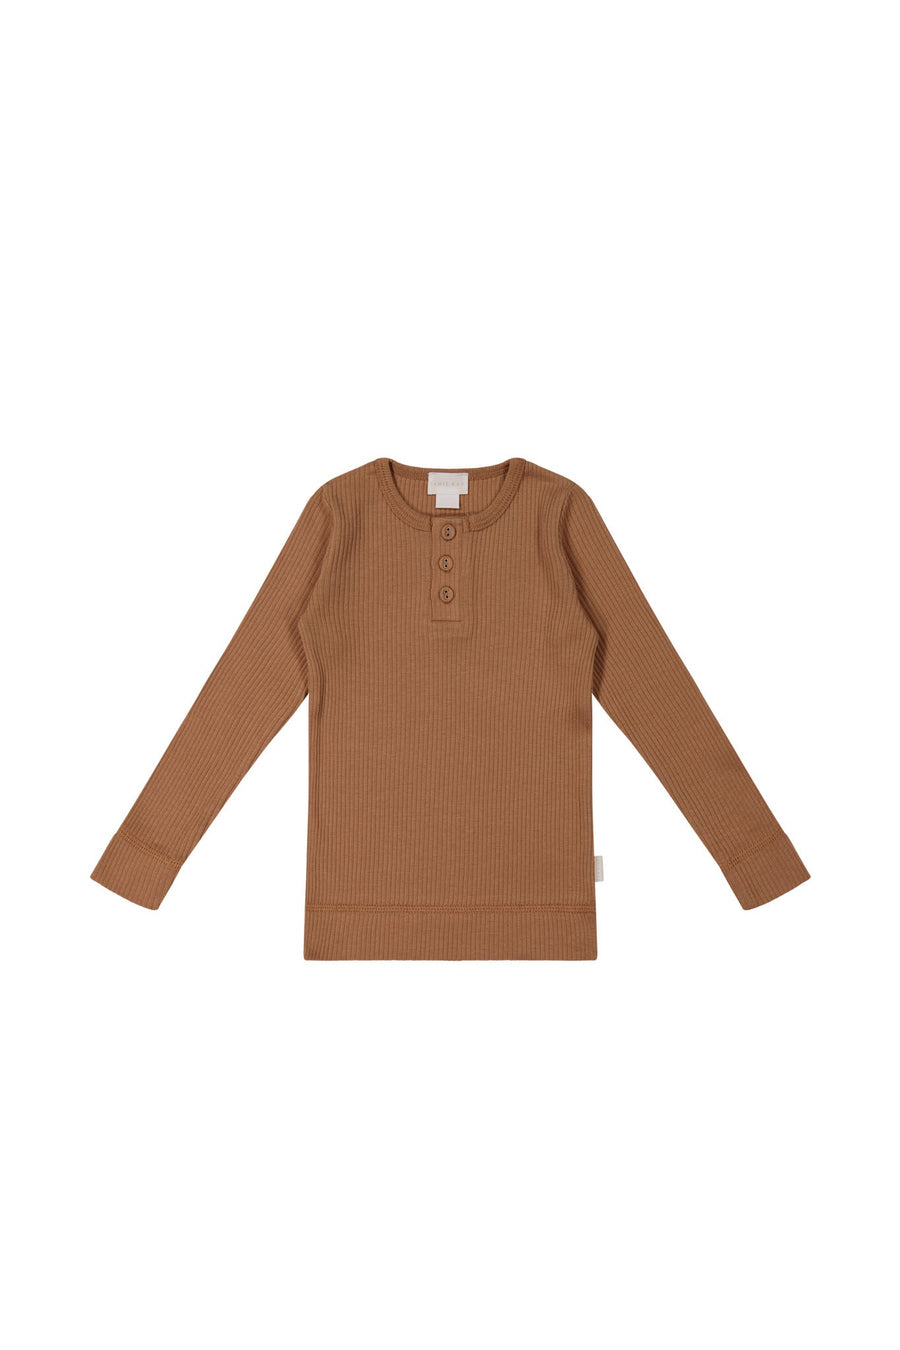 Organic Cotton Modal Long Sleeve Henley - Baker Childrens Top from Jamie Kay USA